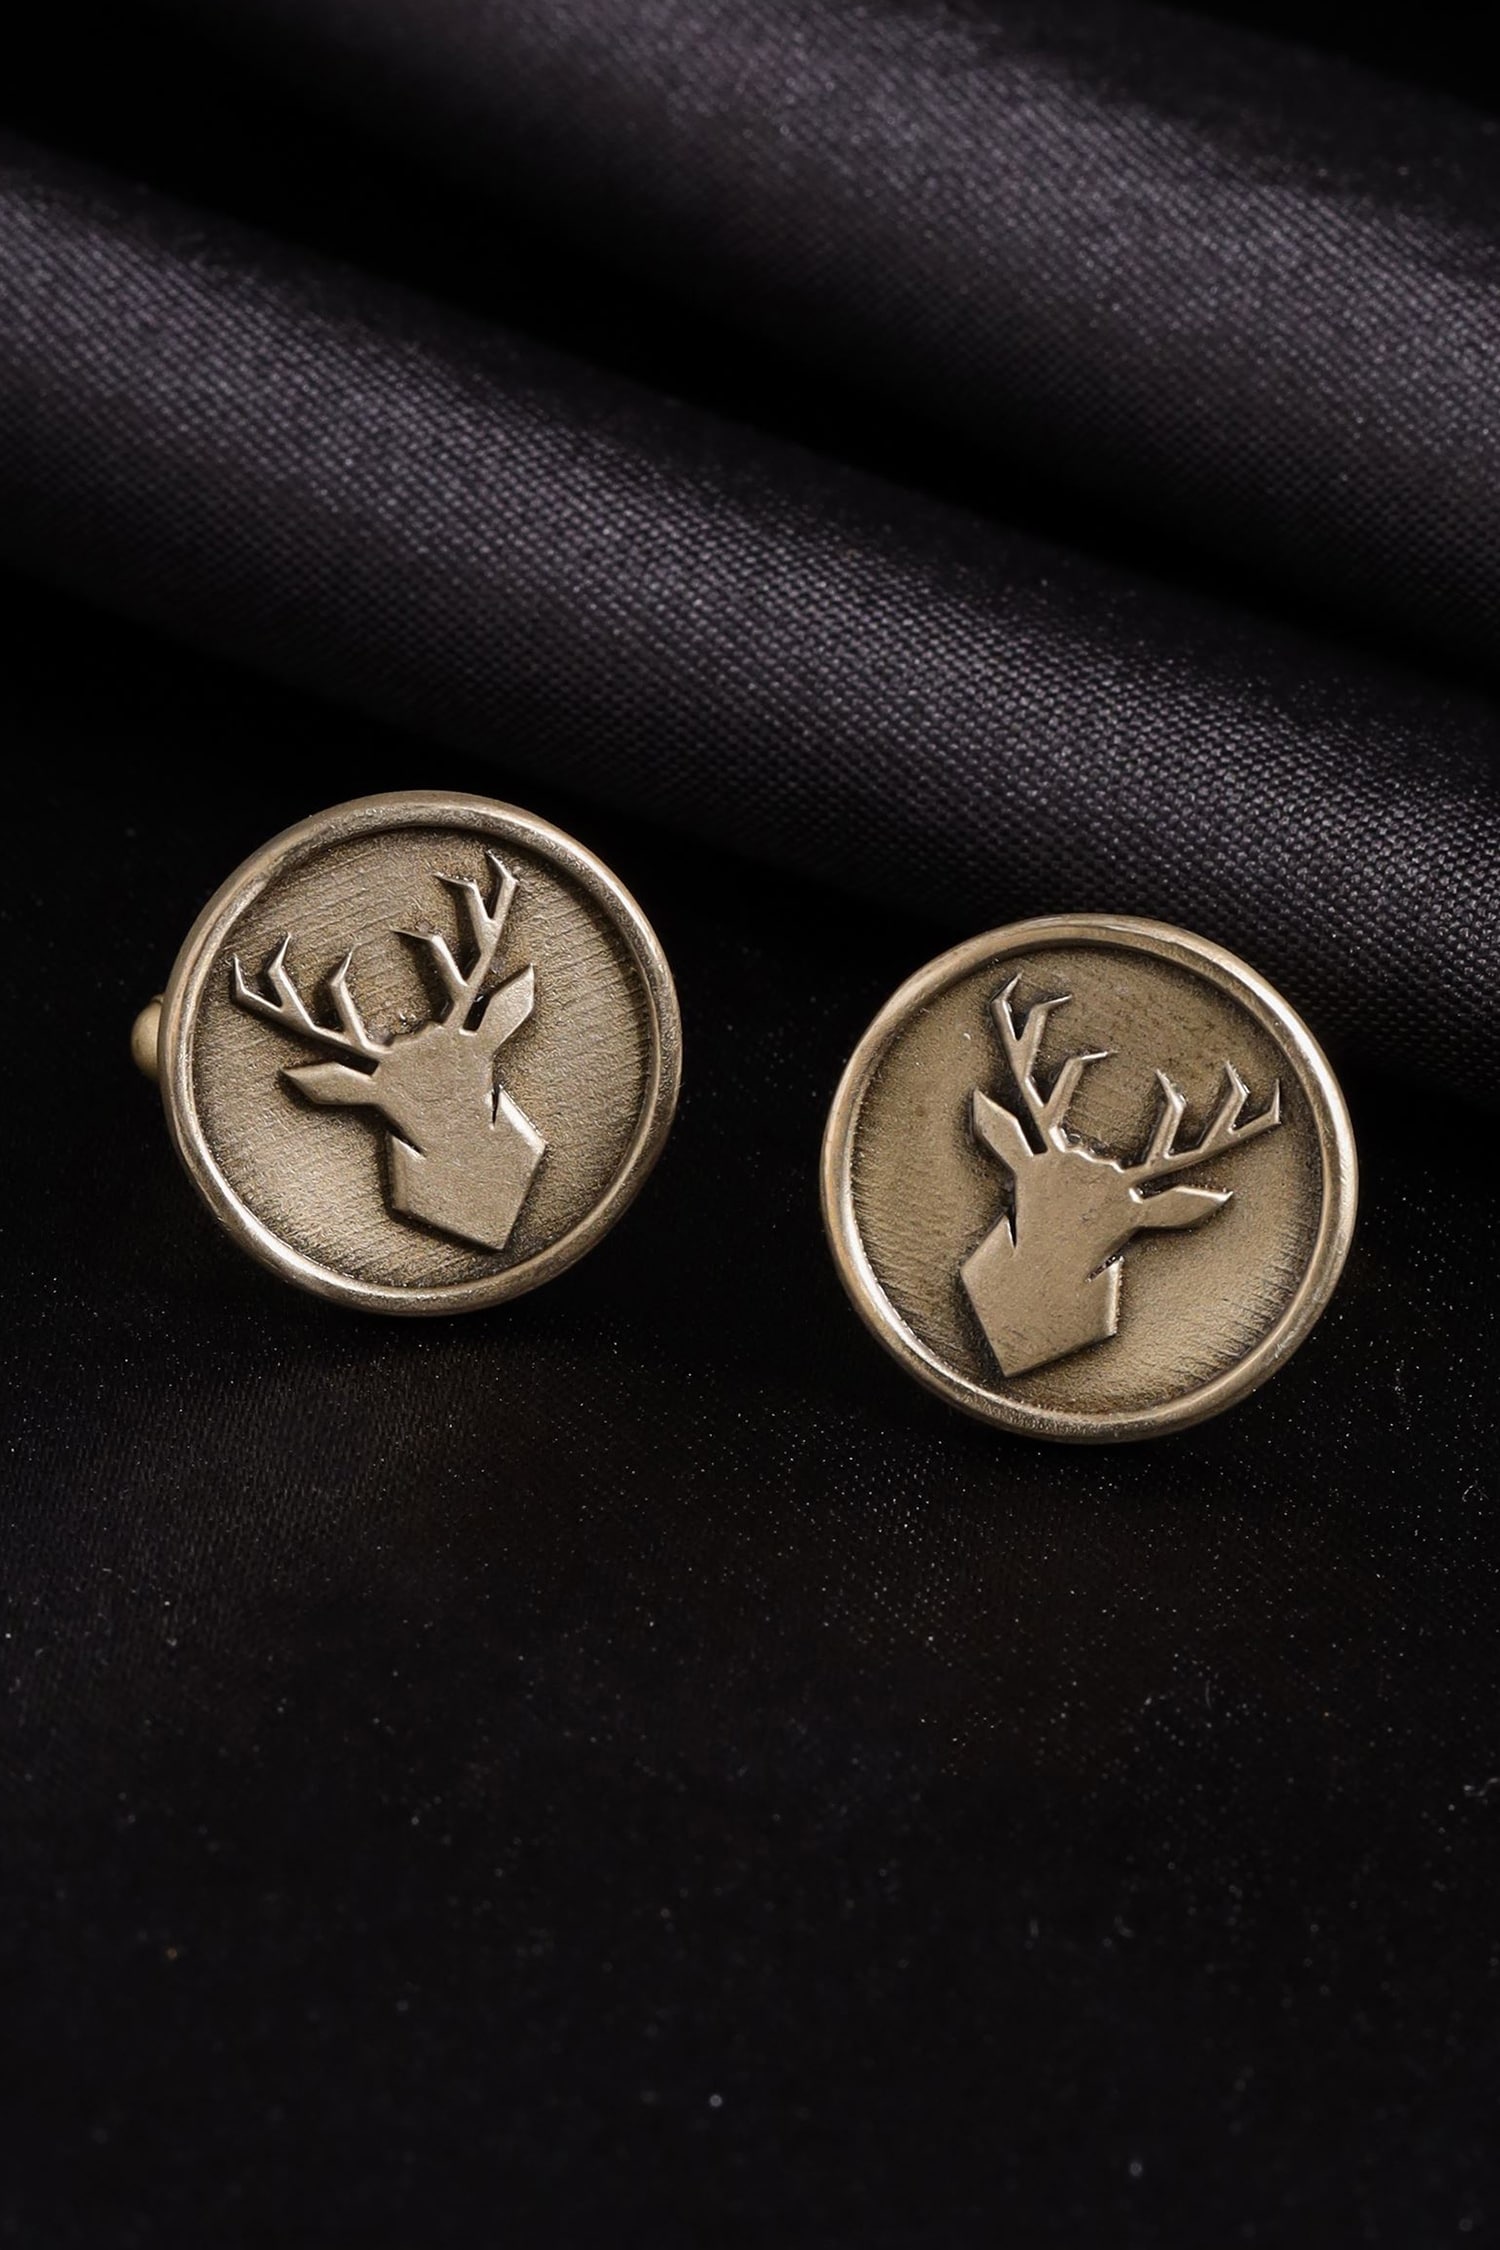 Cosa Nostraa Gold Imperial Stag Cufflinks